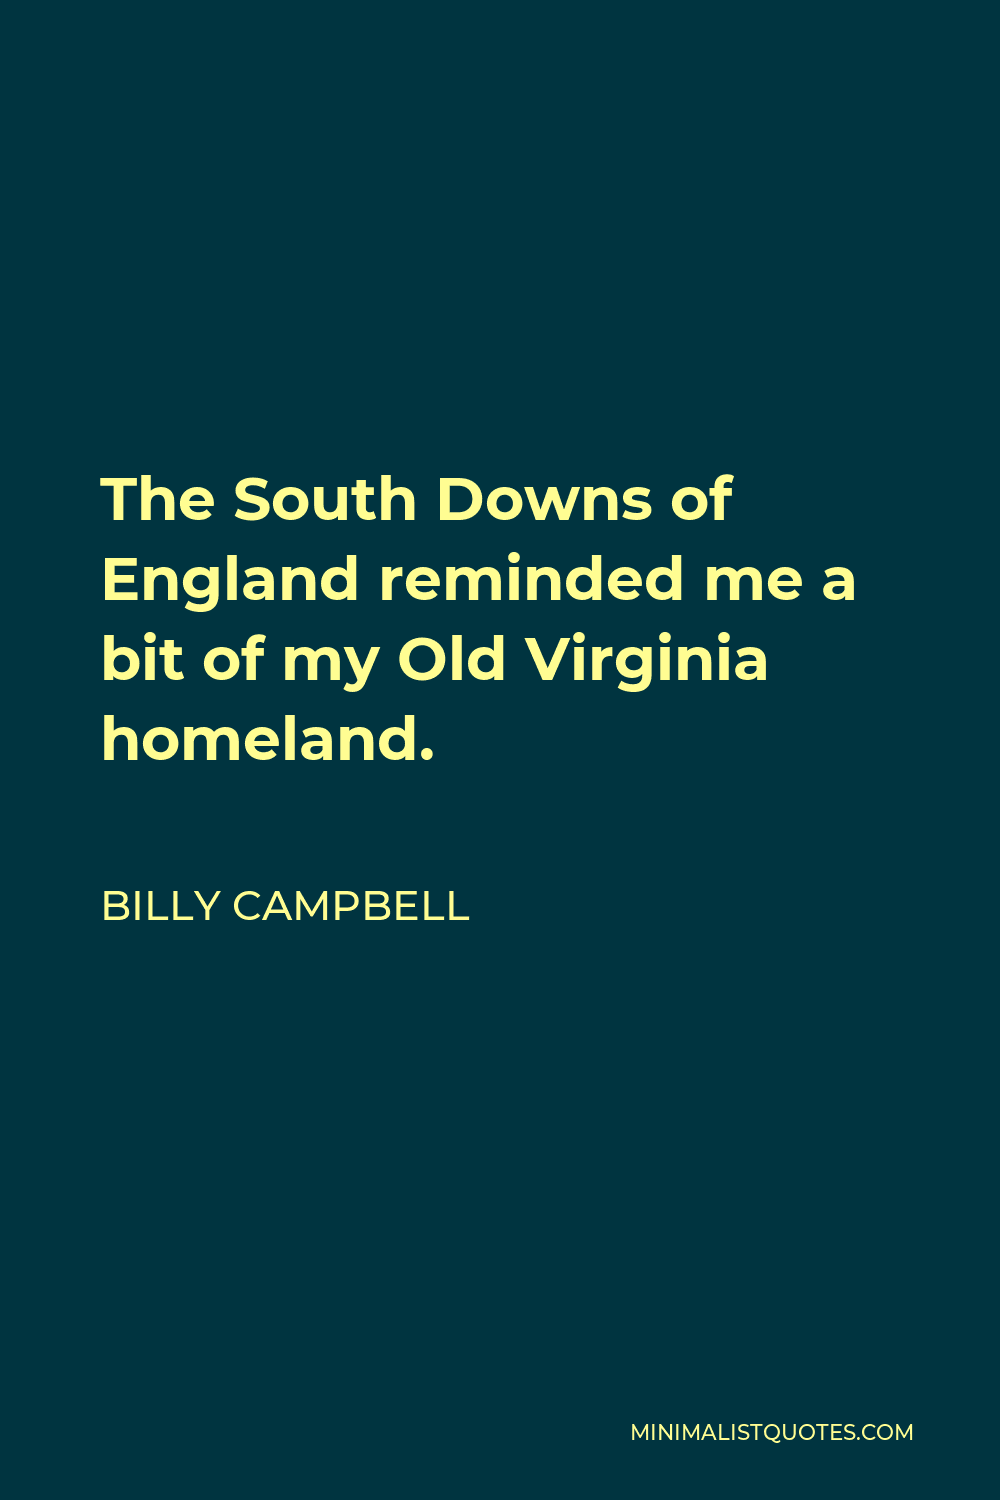 Billy Campbell Quote - The South Downs of England reminded me a bit of my Old Virginia homeland.